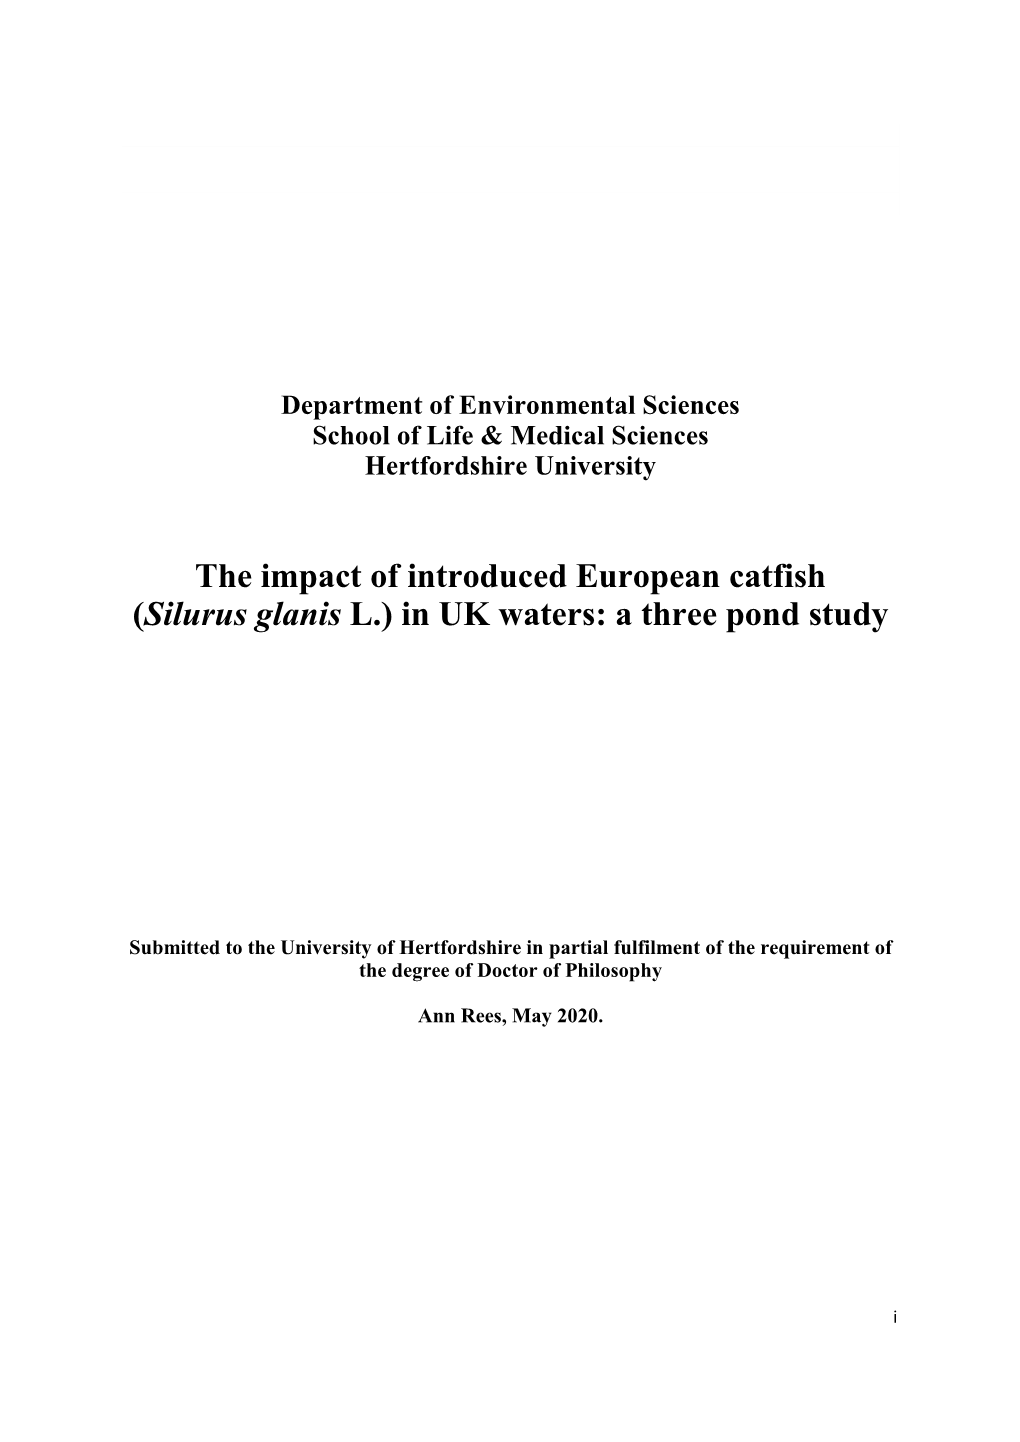 The Impact of Introduced European Catfish (Silurus Glanis L.) in UK Waters: a Three Pond Study